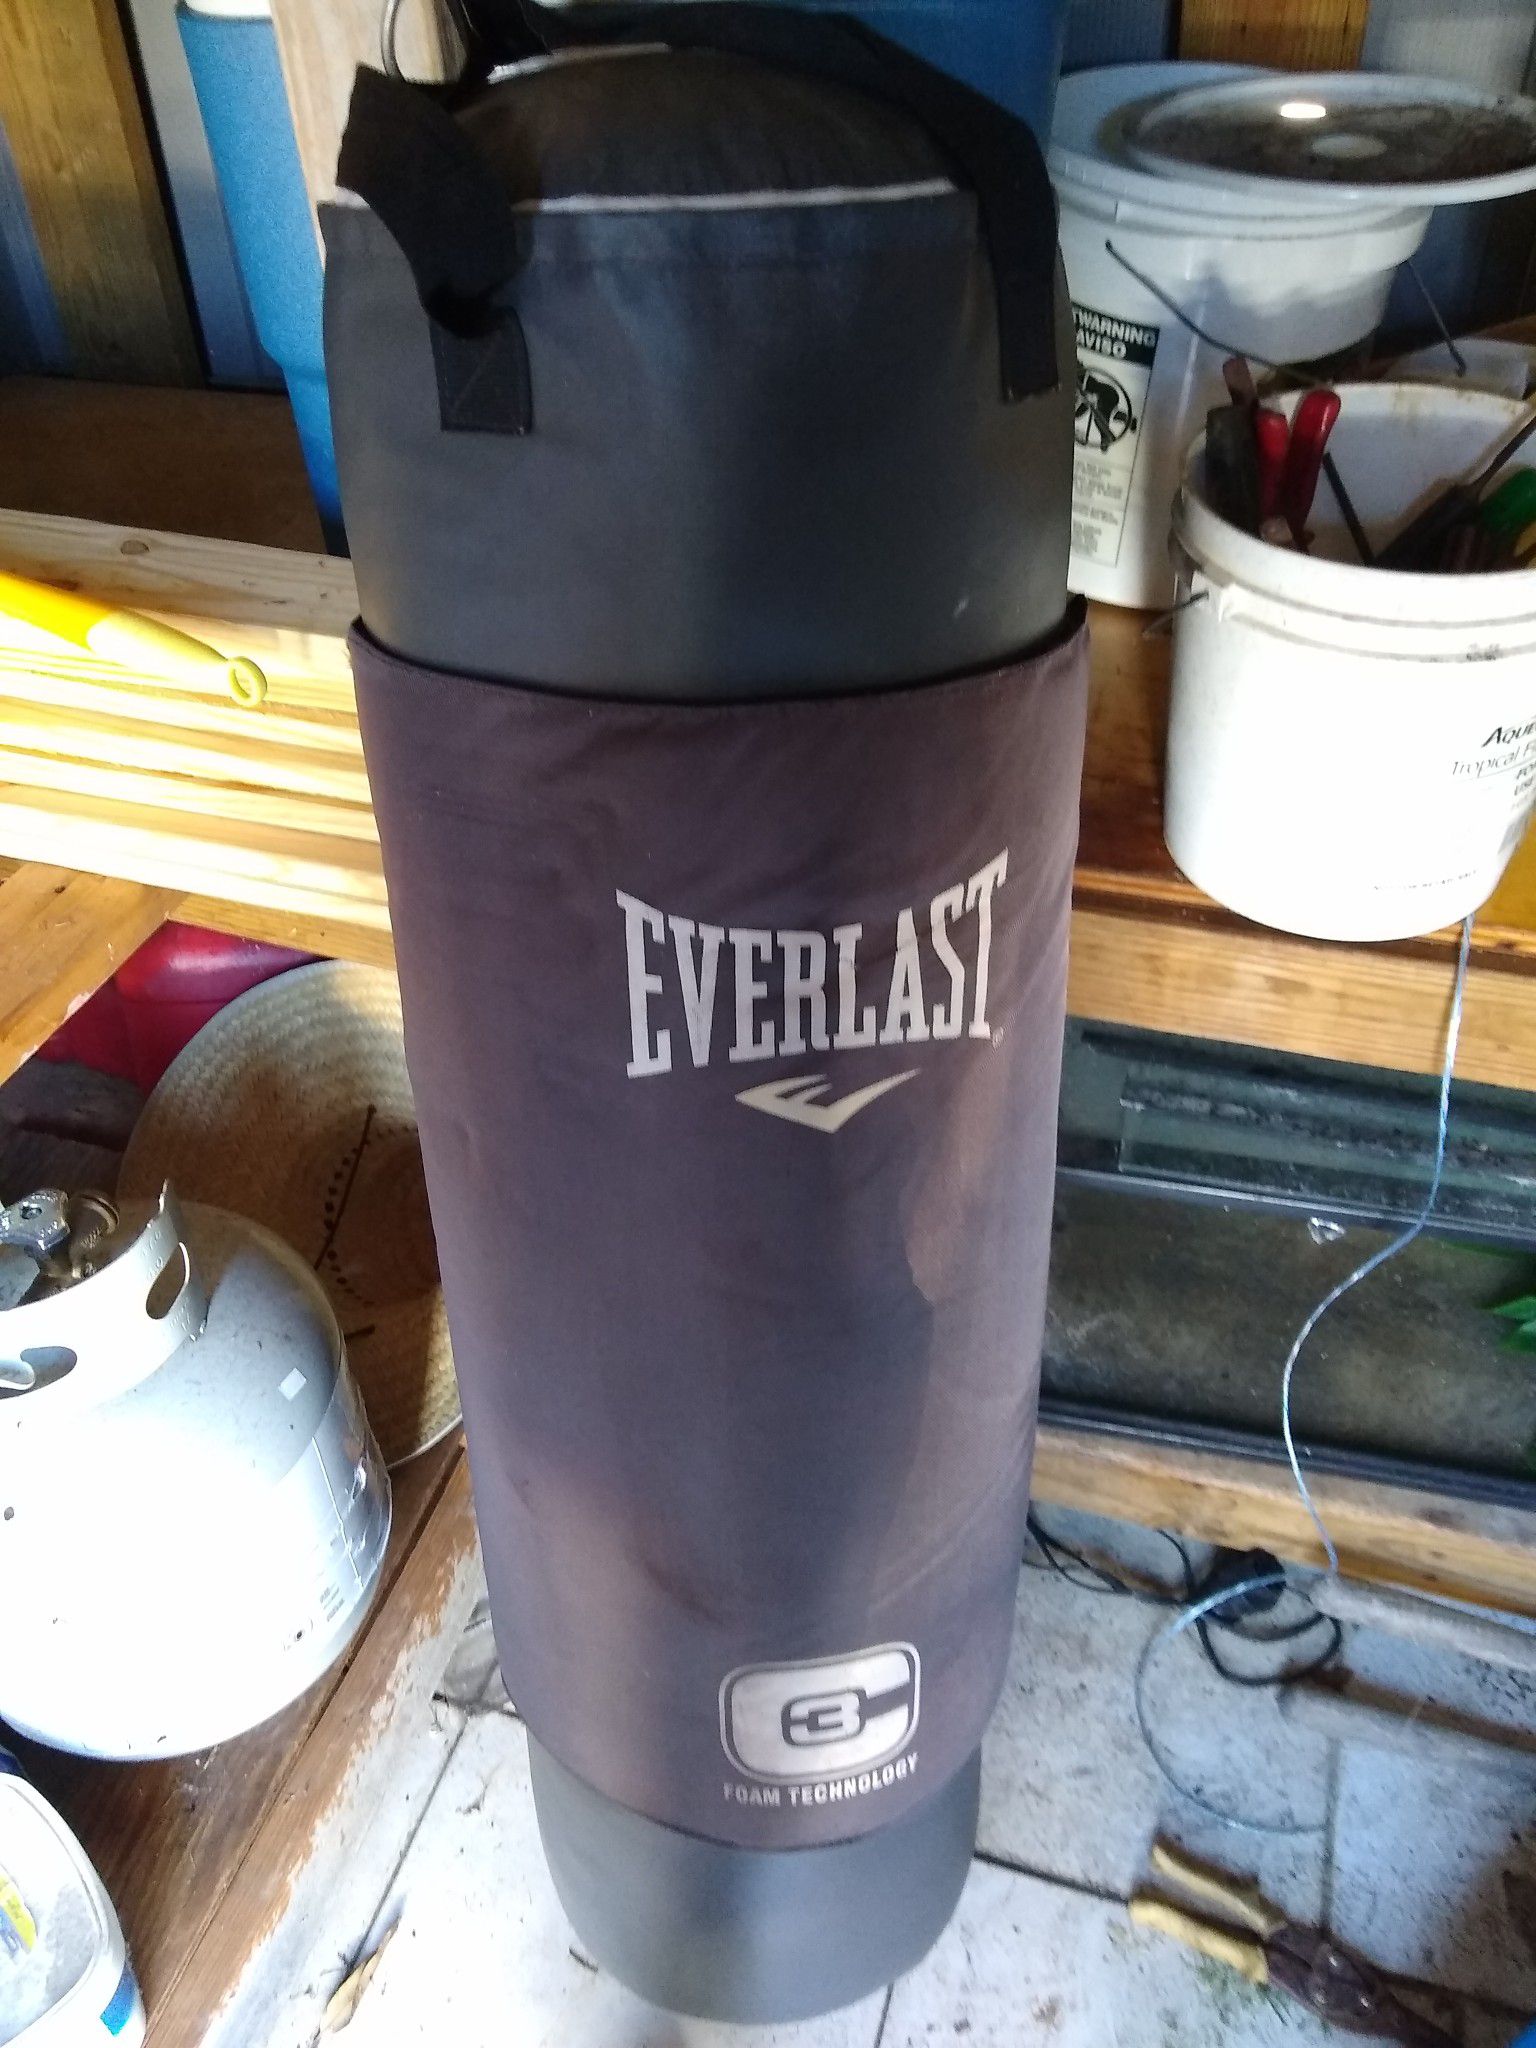 100lb Heavy bag and stand with boxing gloves